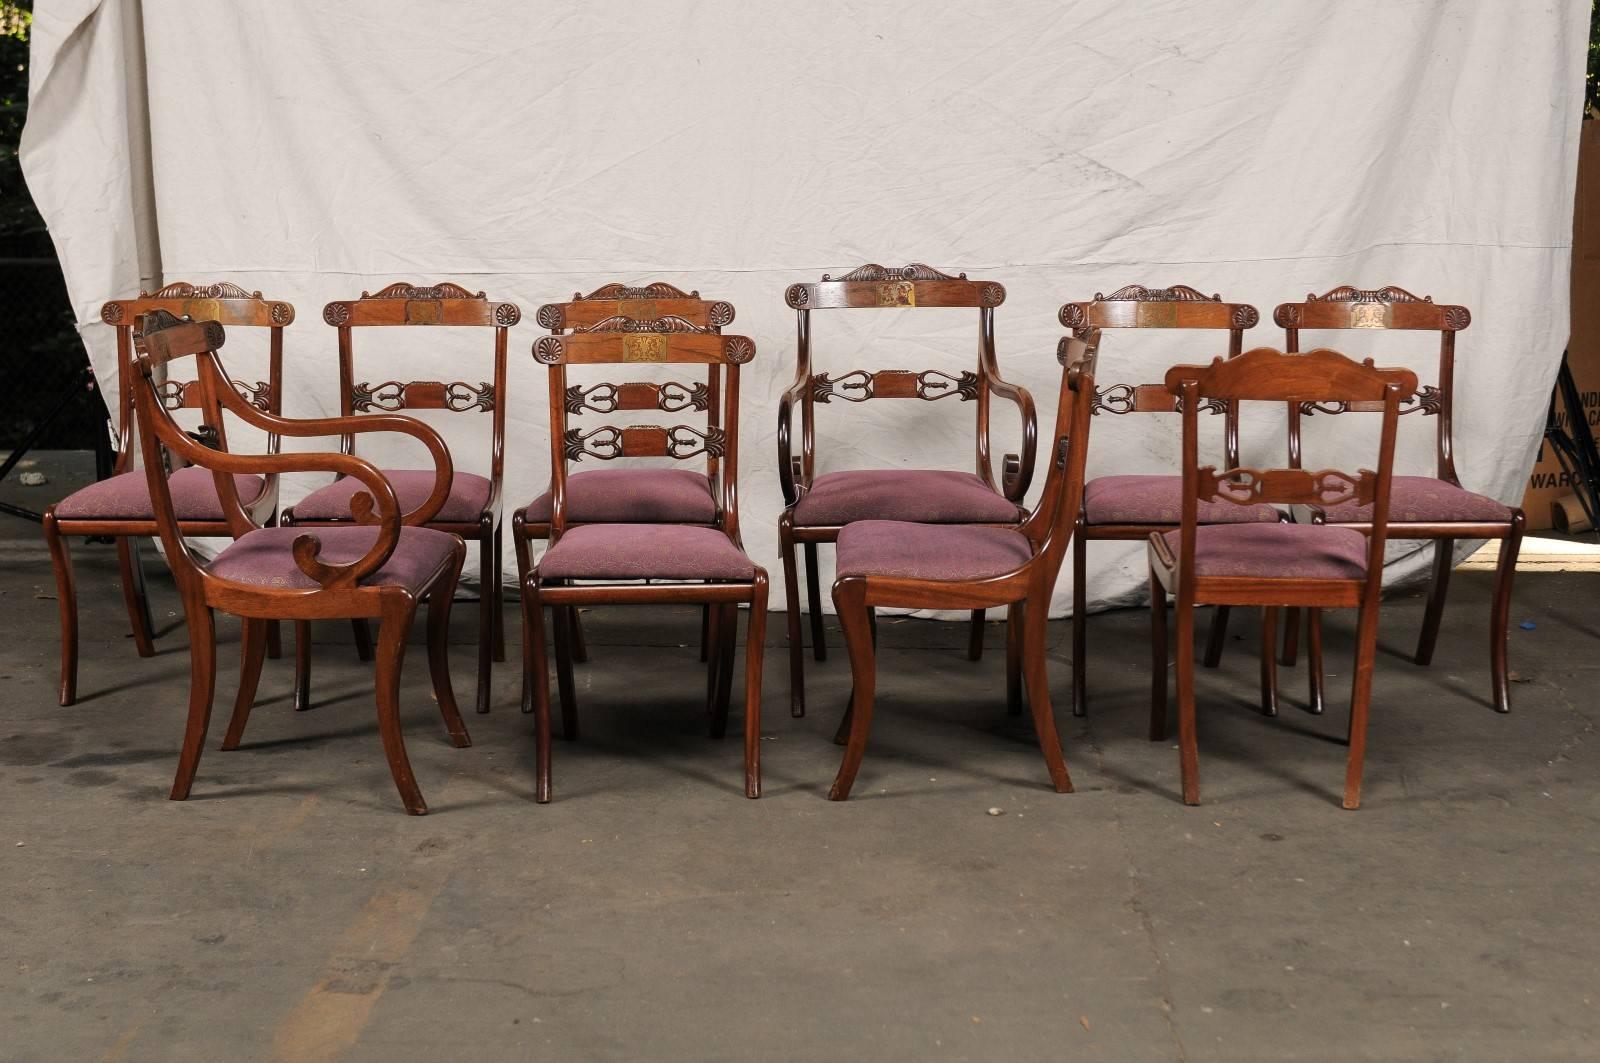 Set of Ten Regency Style Dining Chairs, Rosewood, Mahogany and Brass Inlay 1